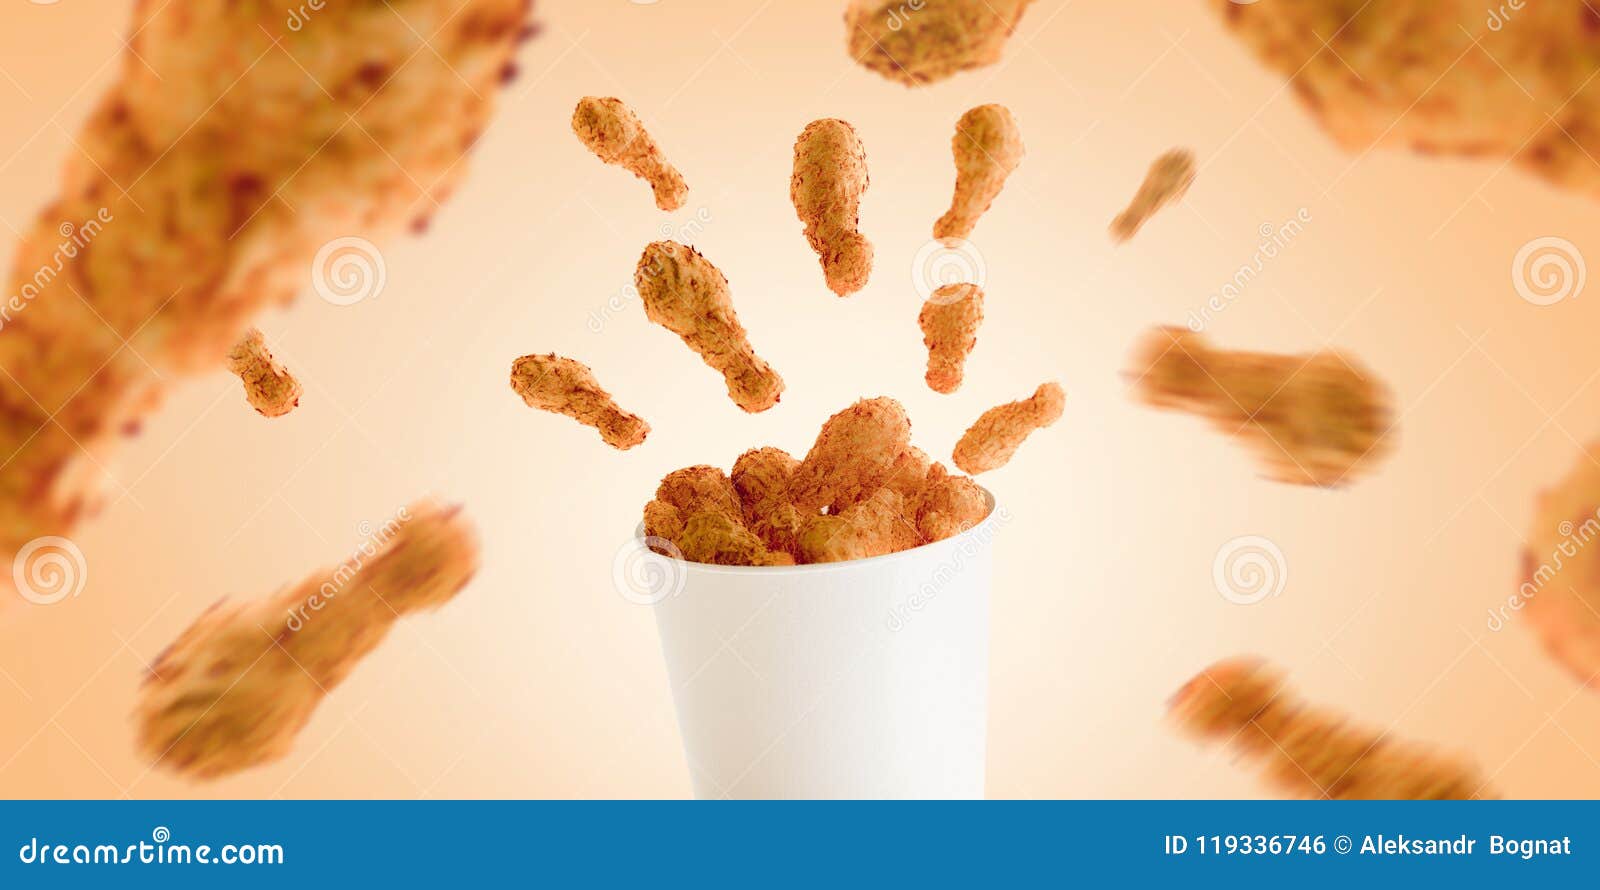 Download Blank Food Bucket With Chicken Wings Mock Up Stock Photo - Image of overweight, fried: 119336746